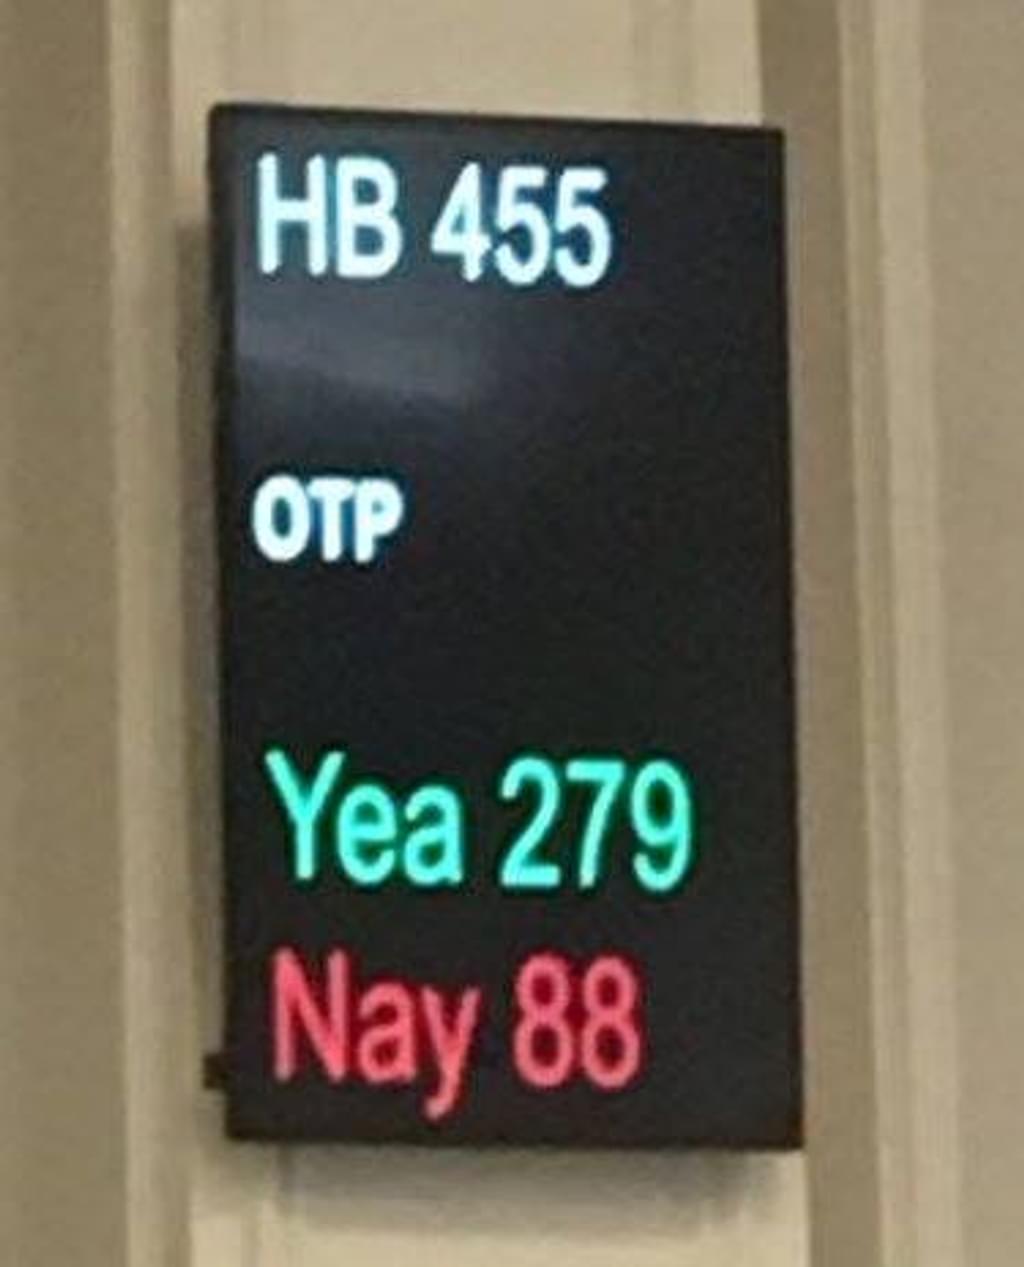 Veto-Proof Majority of New Hampshire House Votes to Repeal State’s Death Penalty